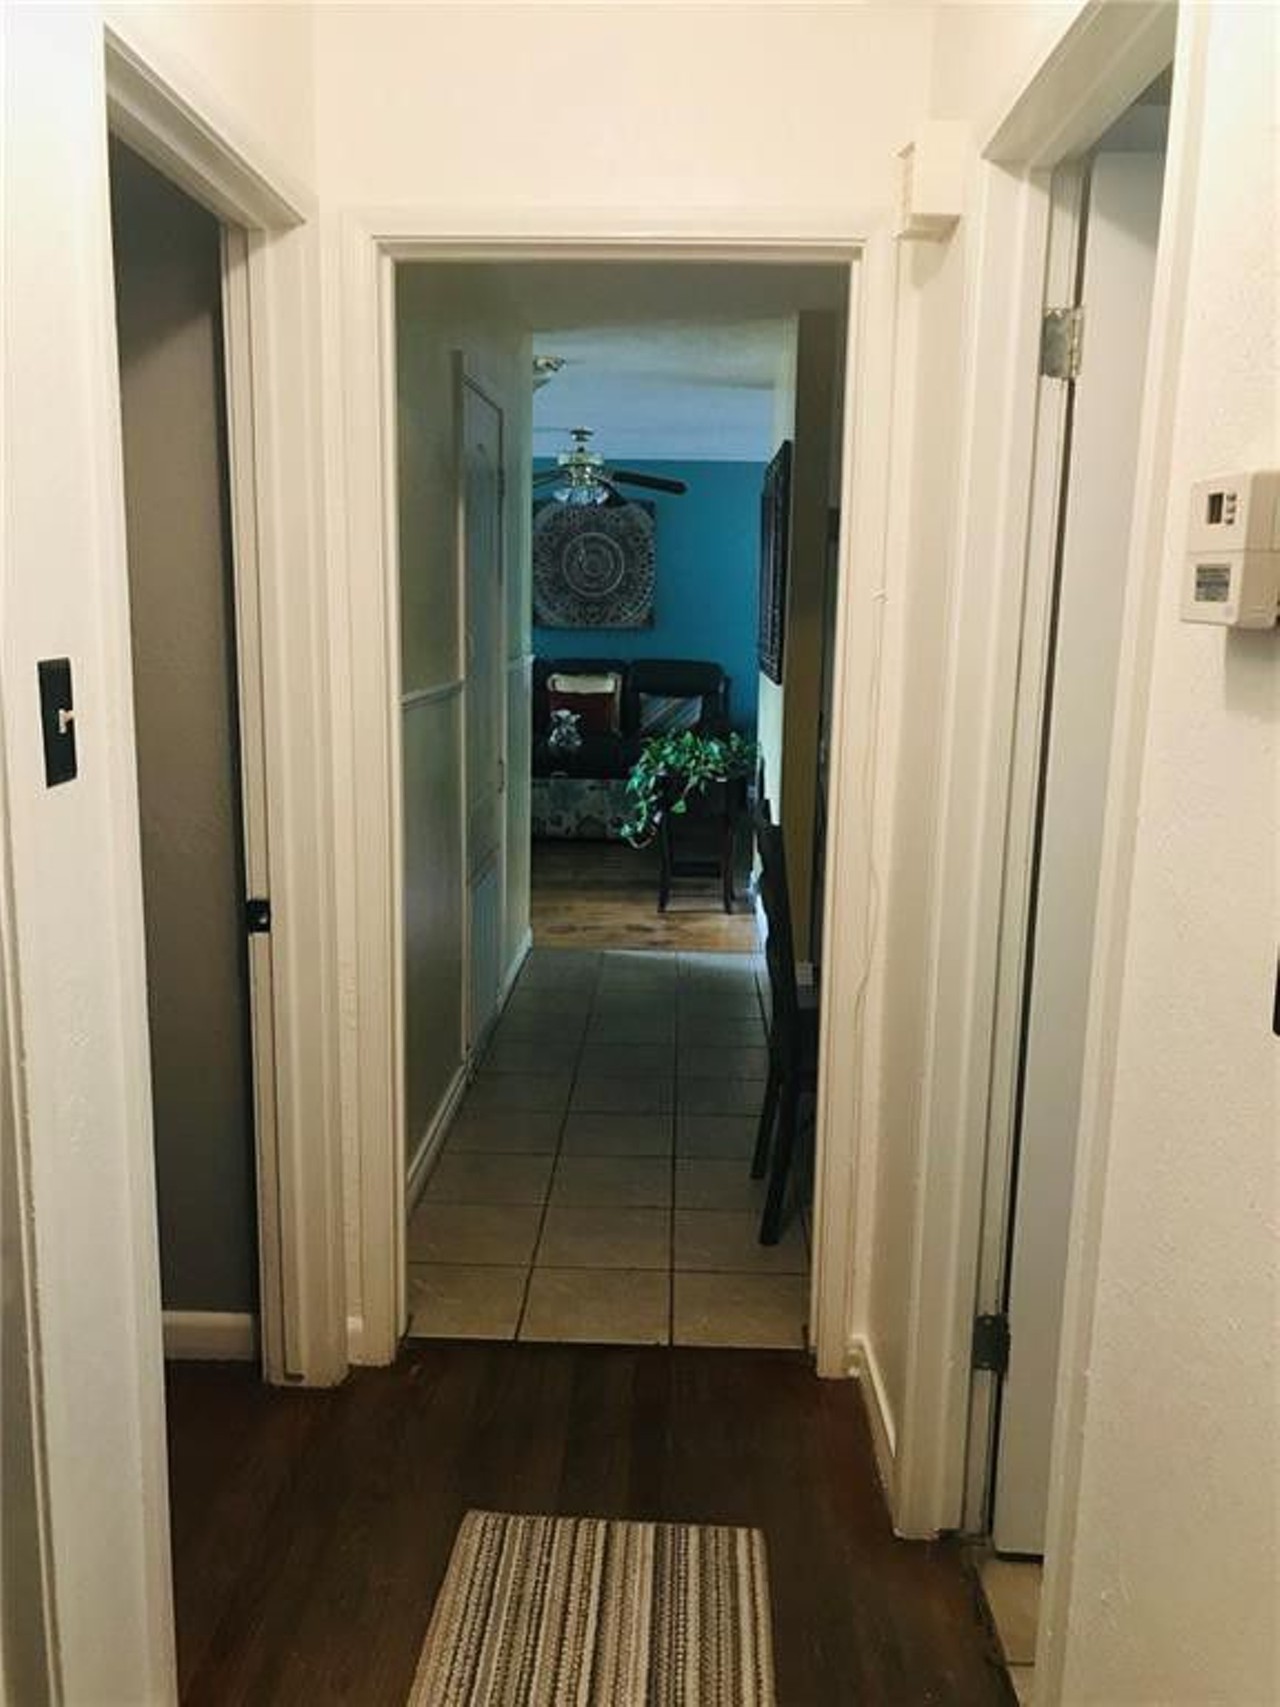 Farrah probably ran up and down this hallway.